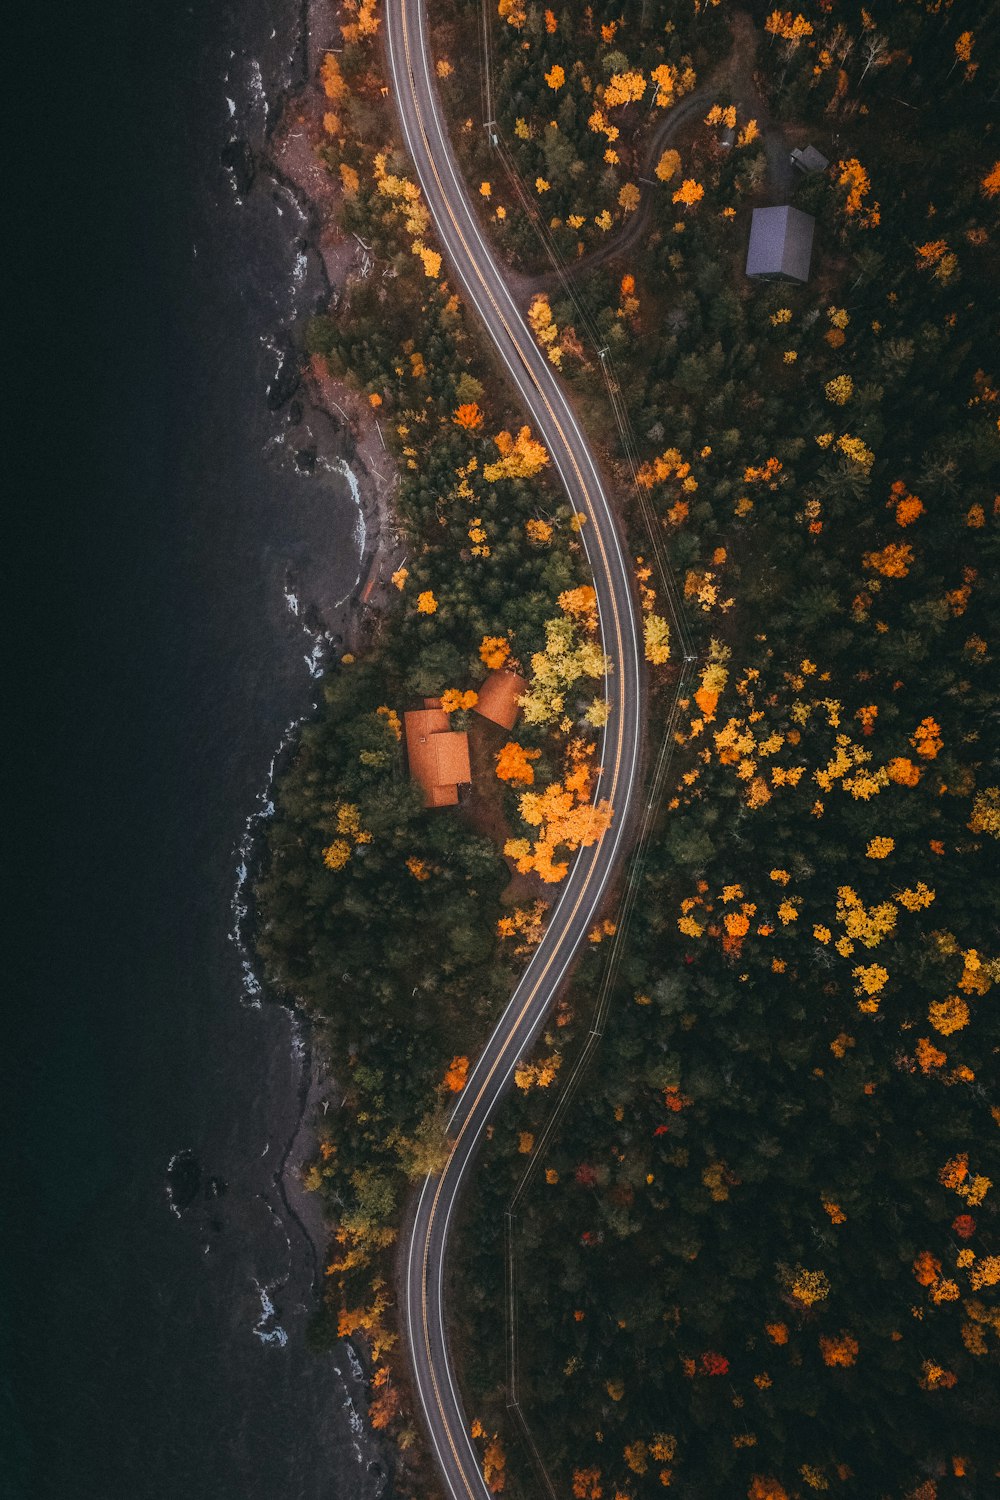 Drone Wallpaper Pictures | Download Free Images on Unsplash